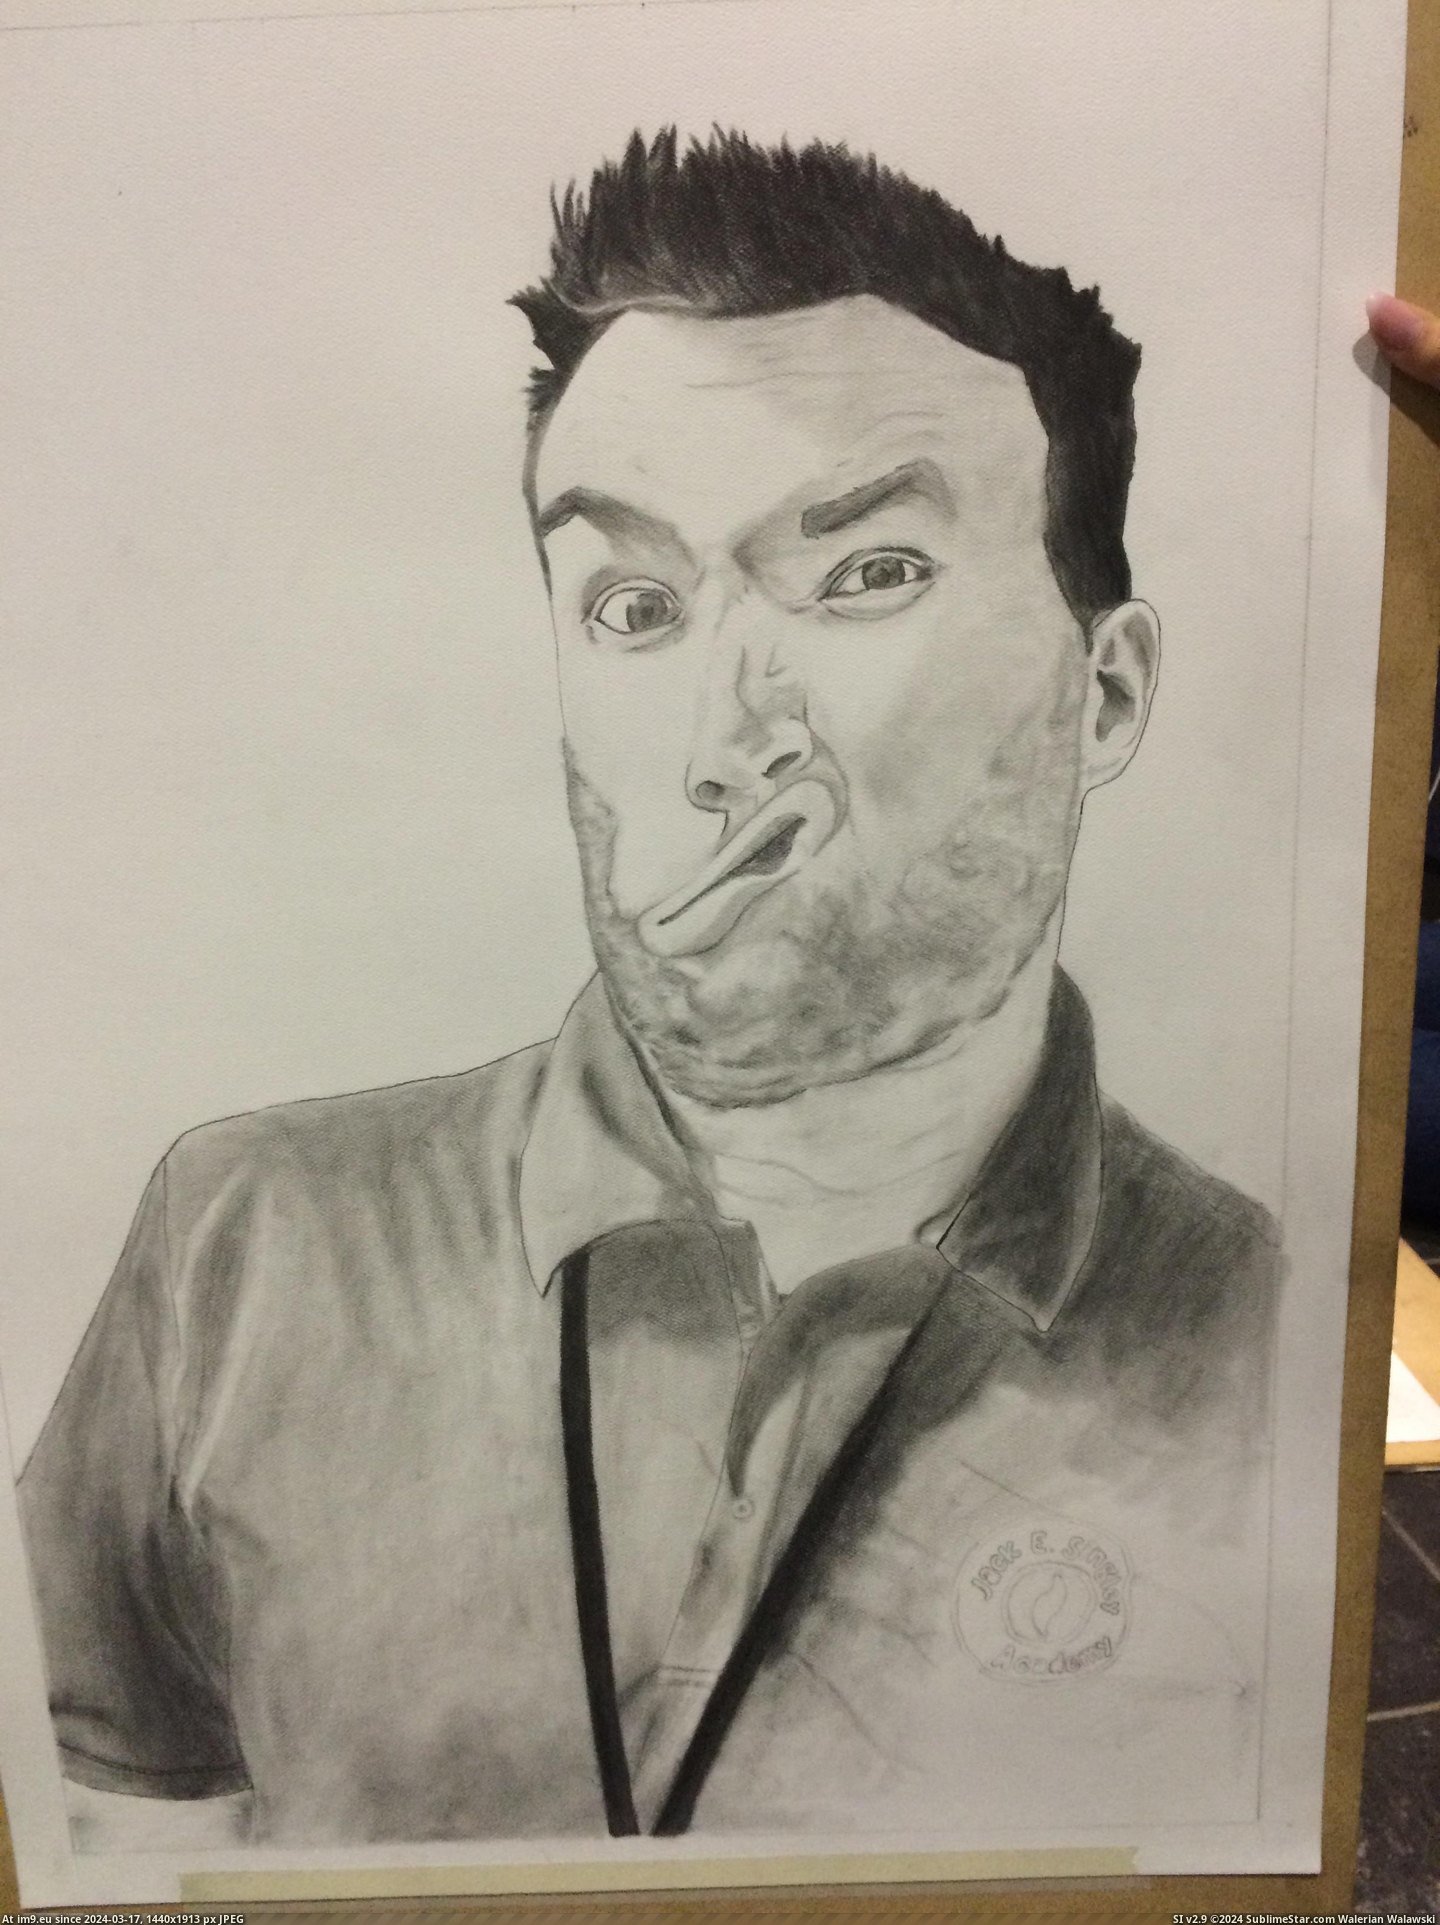 #Funny #One #Art #Drew #Ended #Buying #Teacher #Kids #Project [Funny] I'm a teacher. one of my kids drew me for an art project. Ended up buying it. Pic. (Изображение из альбом My r/FUNNY favs))